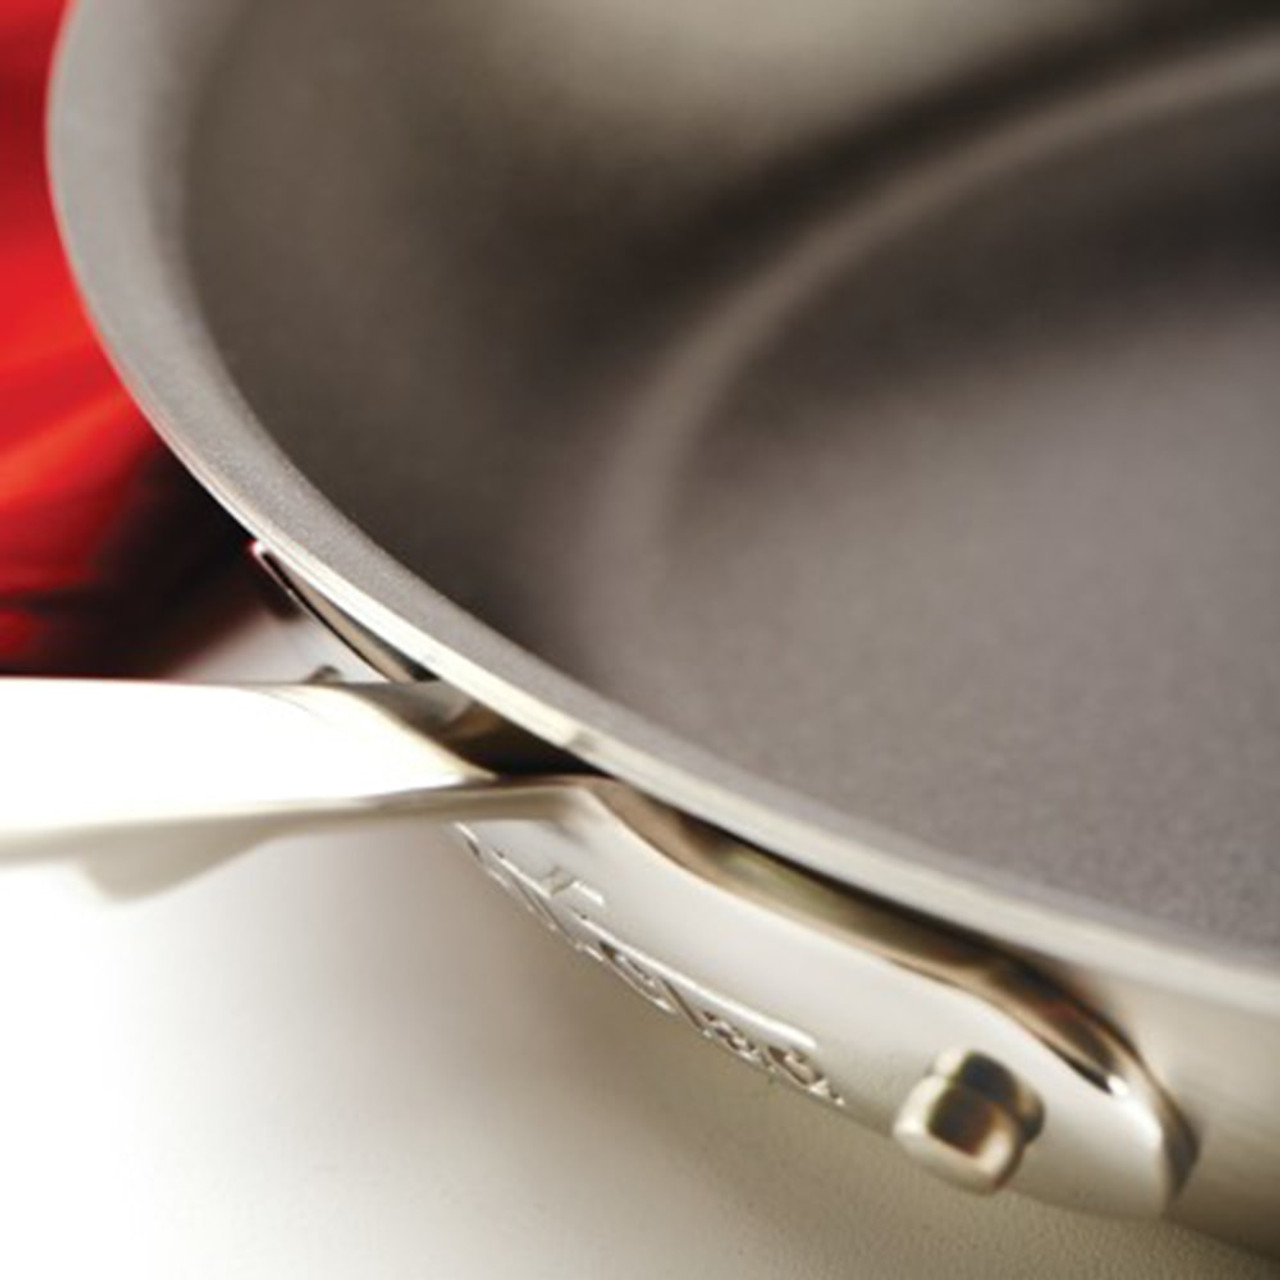 All Clad D5 Brushed Stainless 10 Nonstick Fry Pan